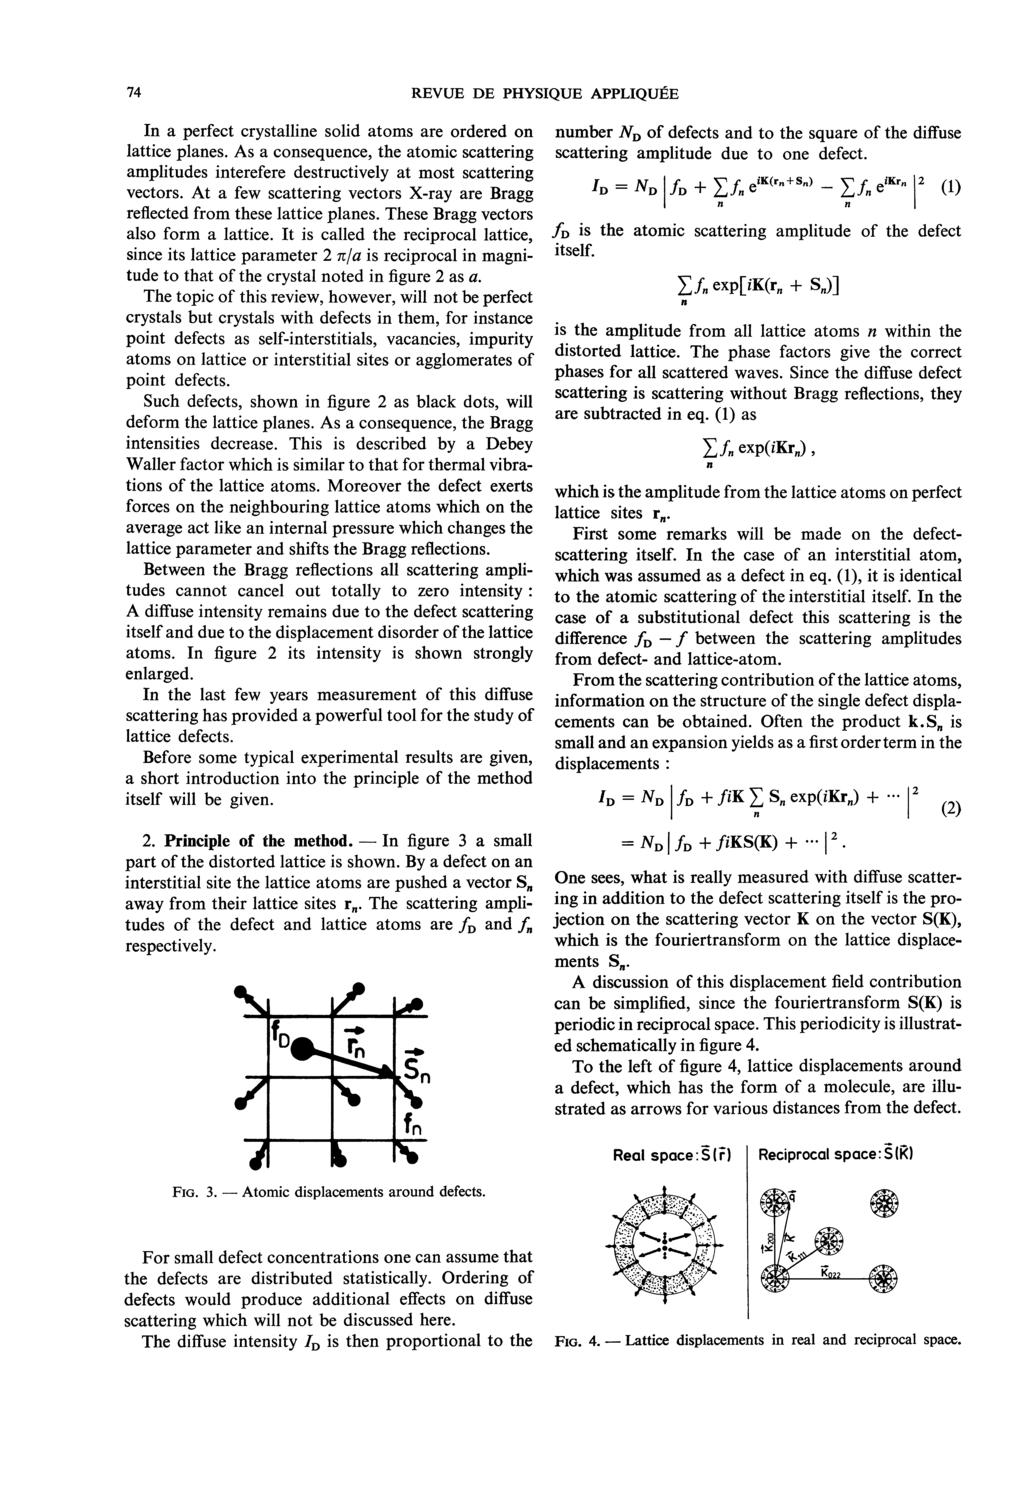 Atomic In Lattice 74 In a perfect crystalline solid atoms are ordered on lattice planes. As a consequence, the atomic scattering amplitudes interefere destructively at most scattering vectors.